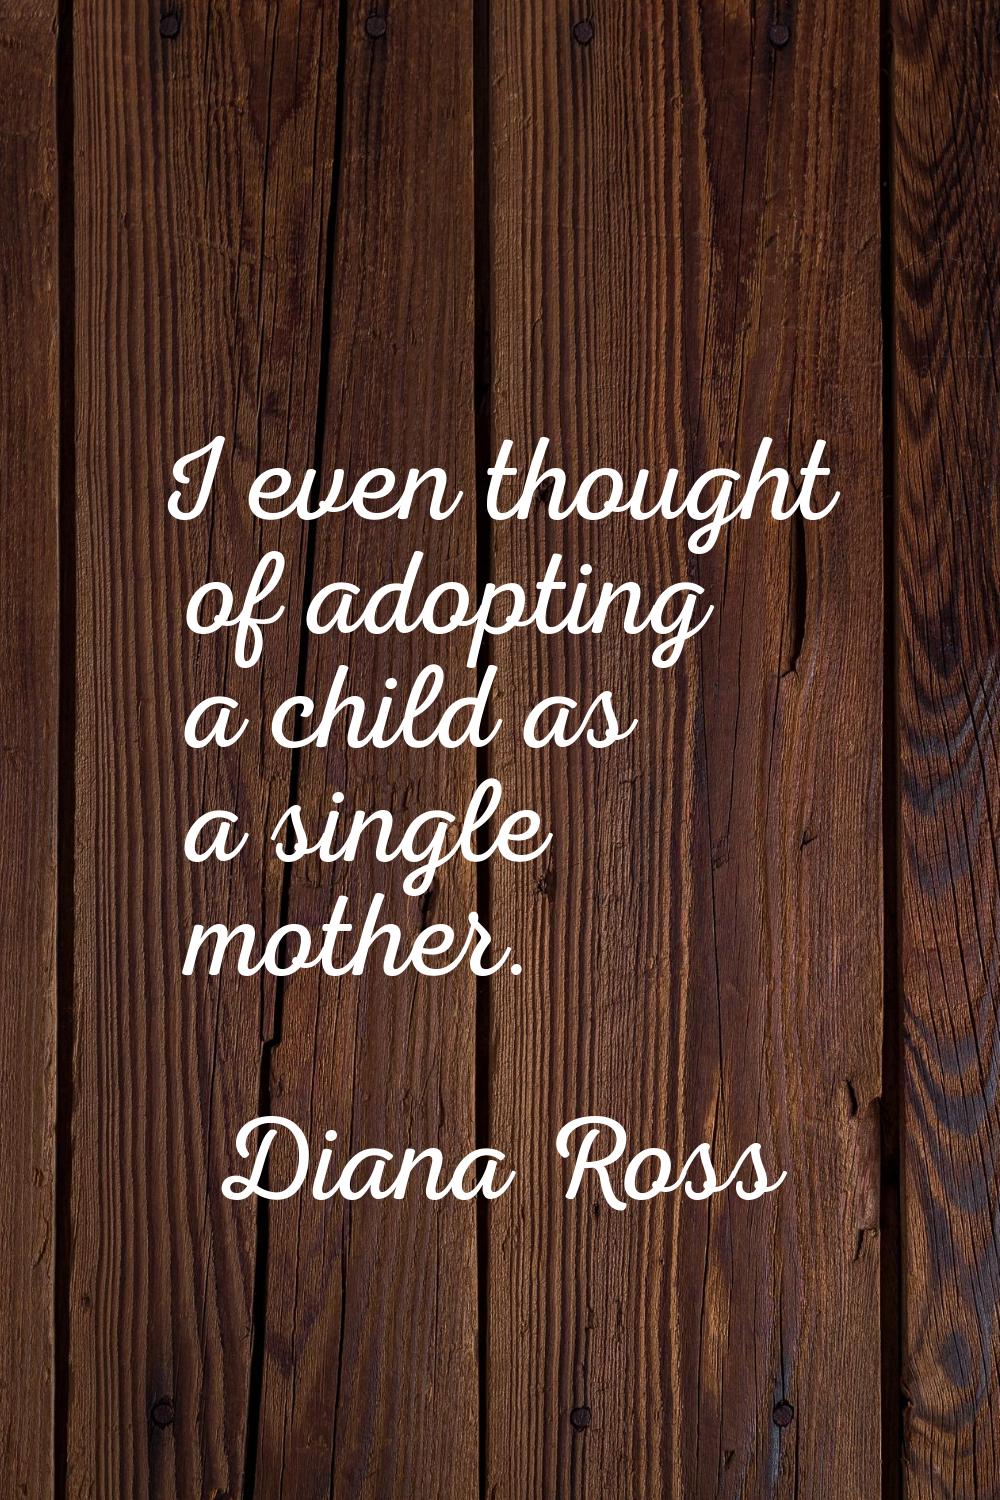 I even thought of adopting a child as a single mother.